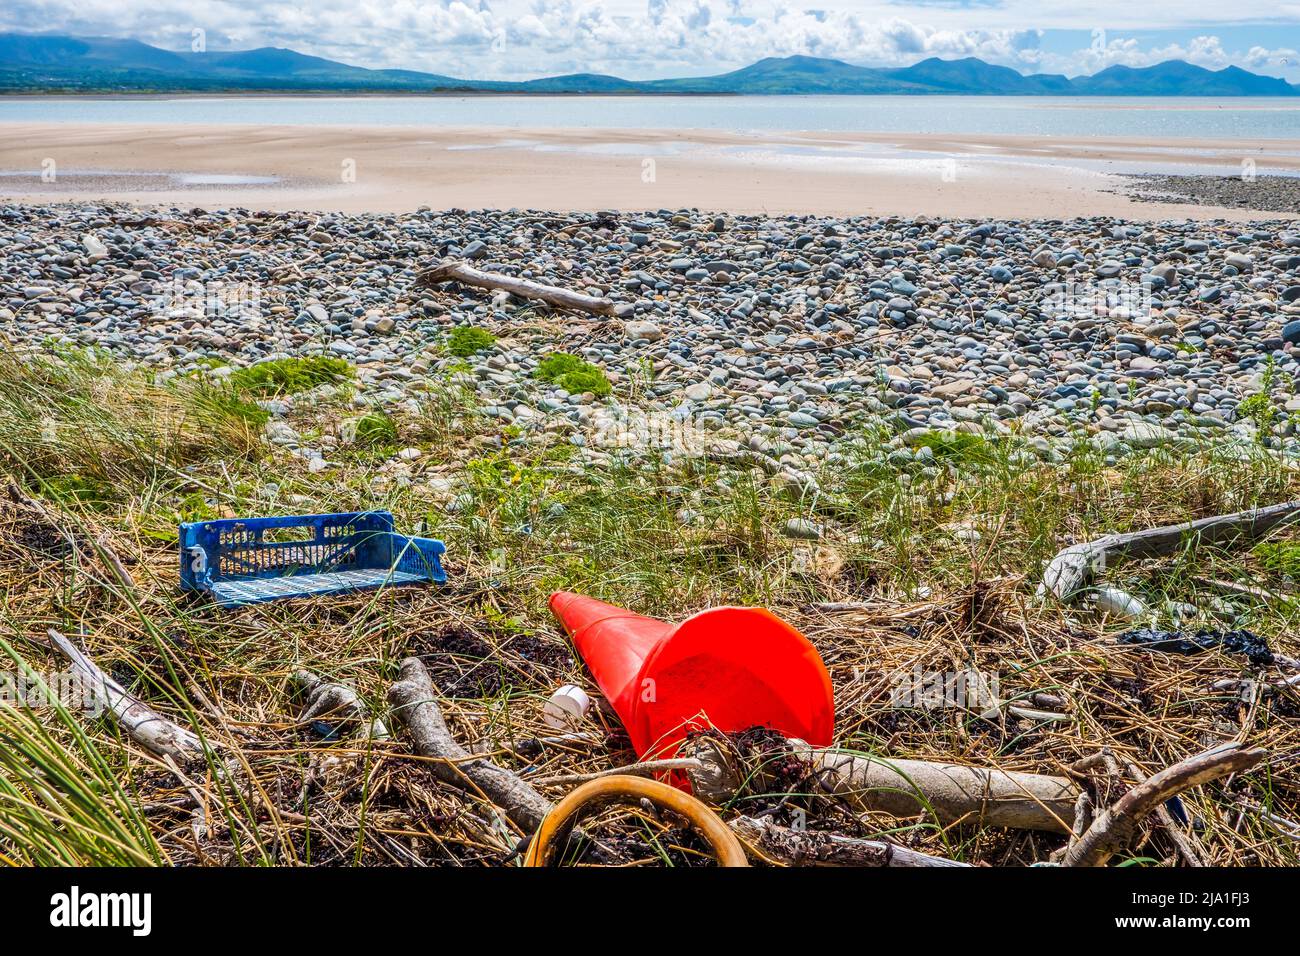 Plastic waste washed up on the beach at Newborough, Anglesey, Wales Stock Photo